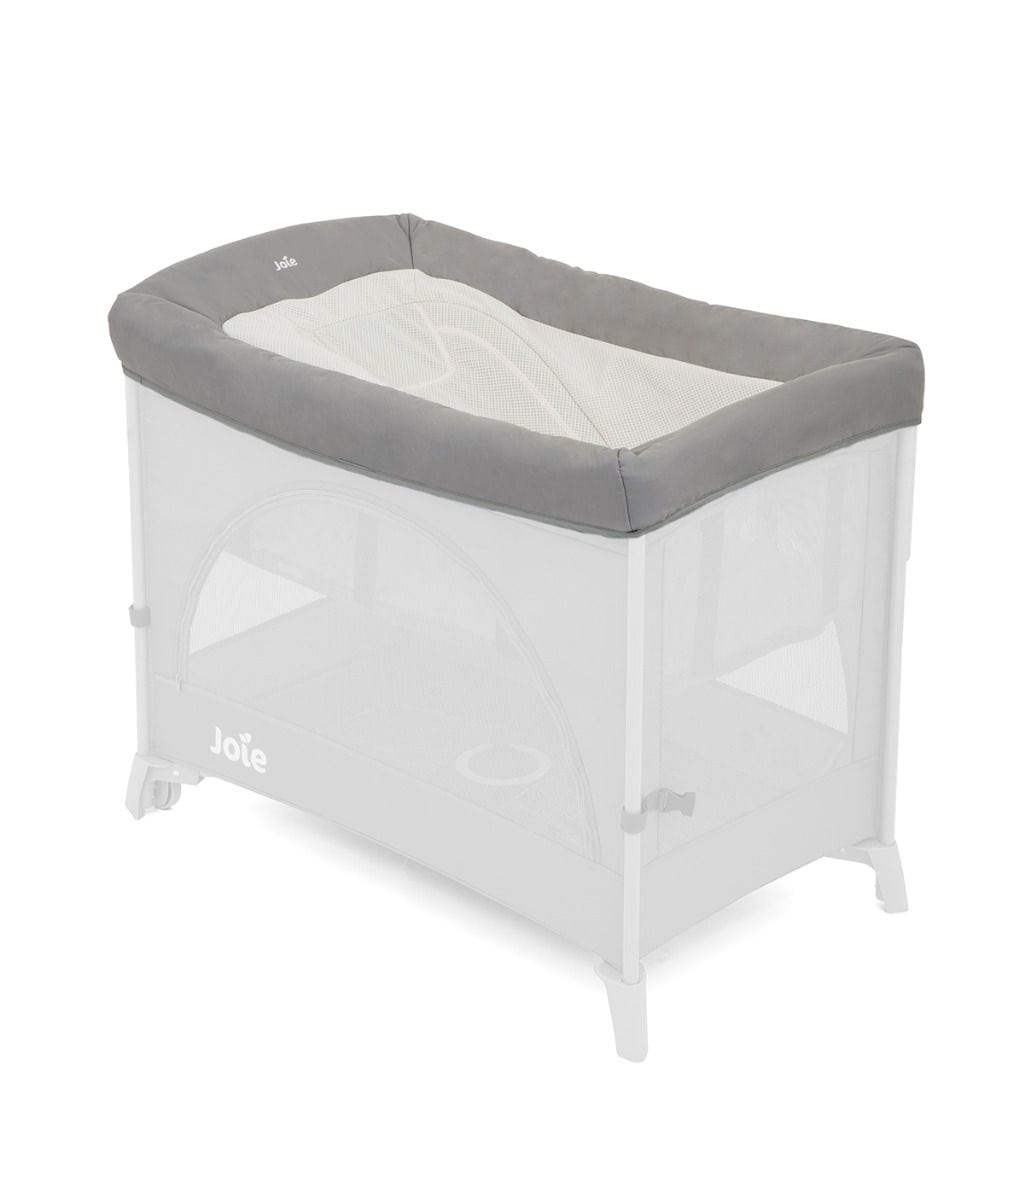 Joie cot bed sheets Joie Kubbie Daydreamer Napper Topper - Foggy Grey A1812SAFGY000